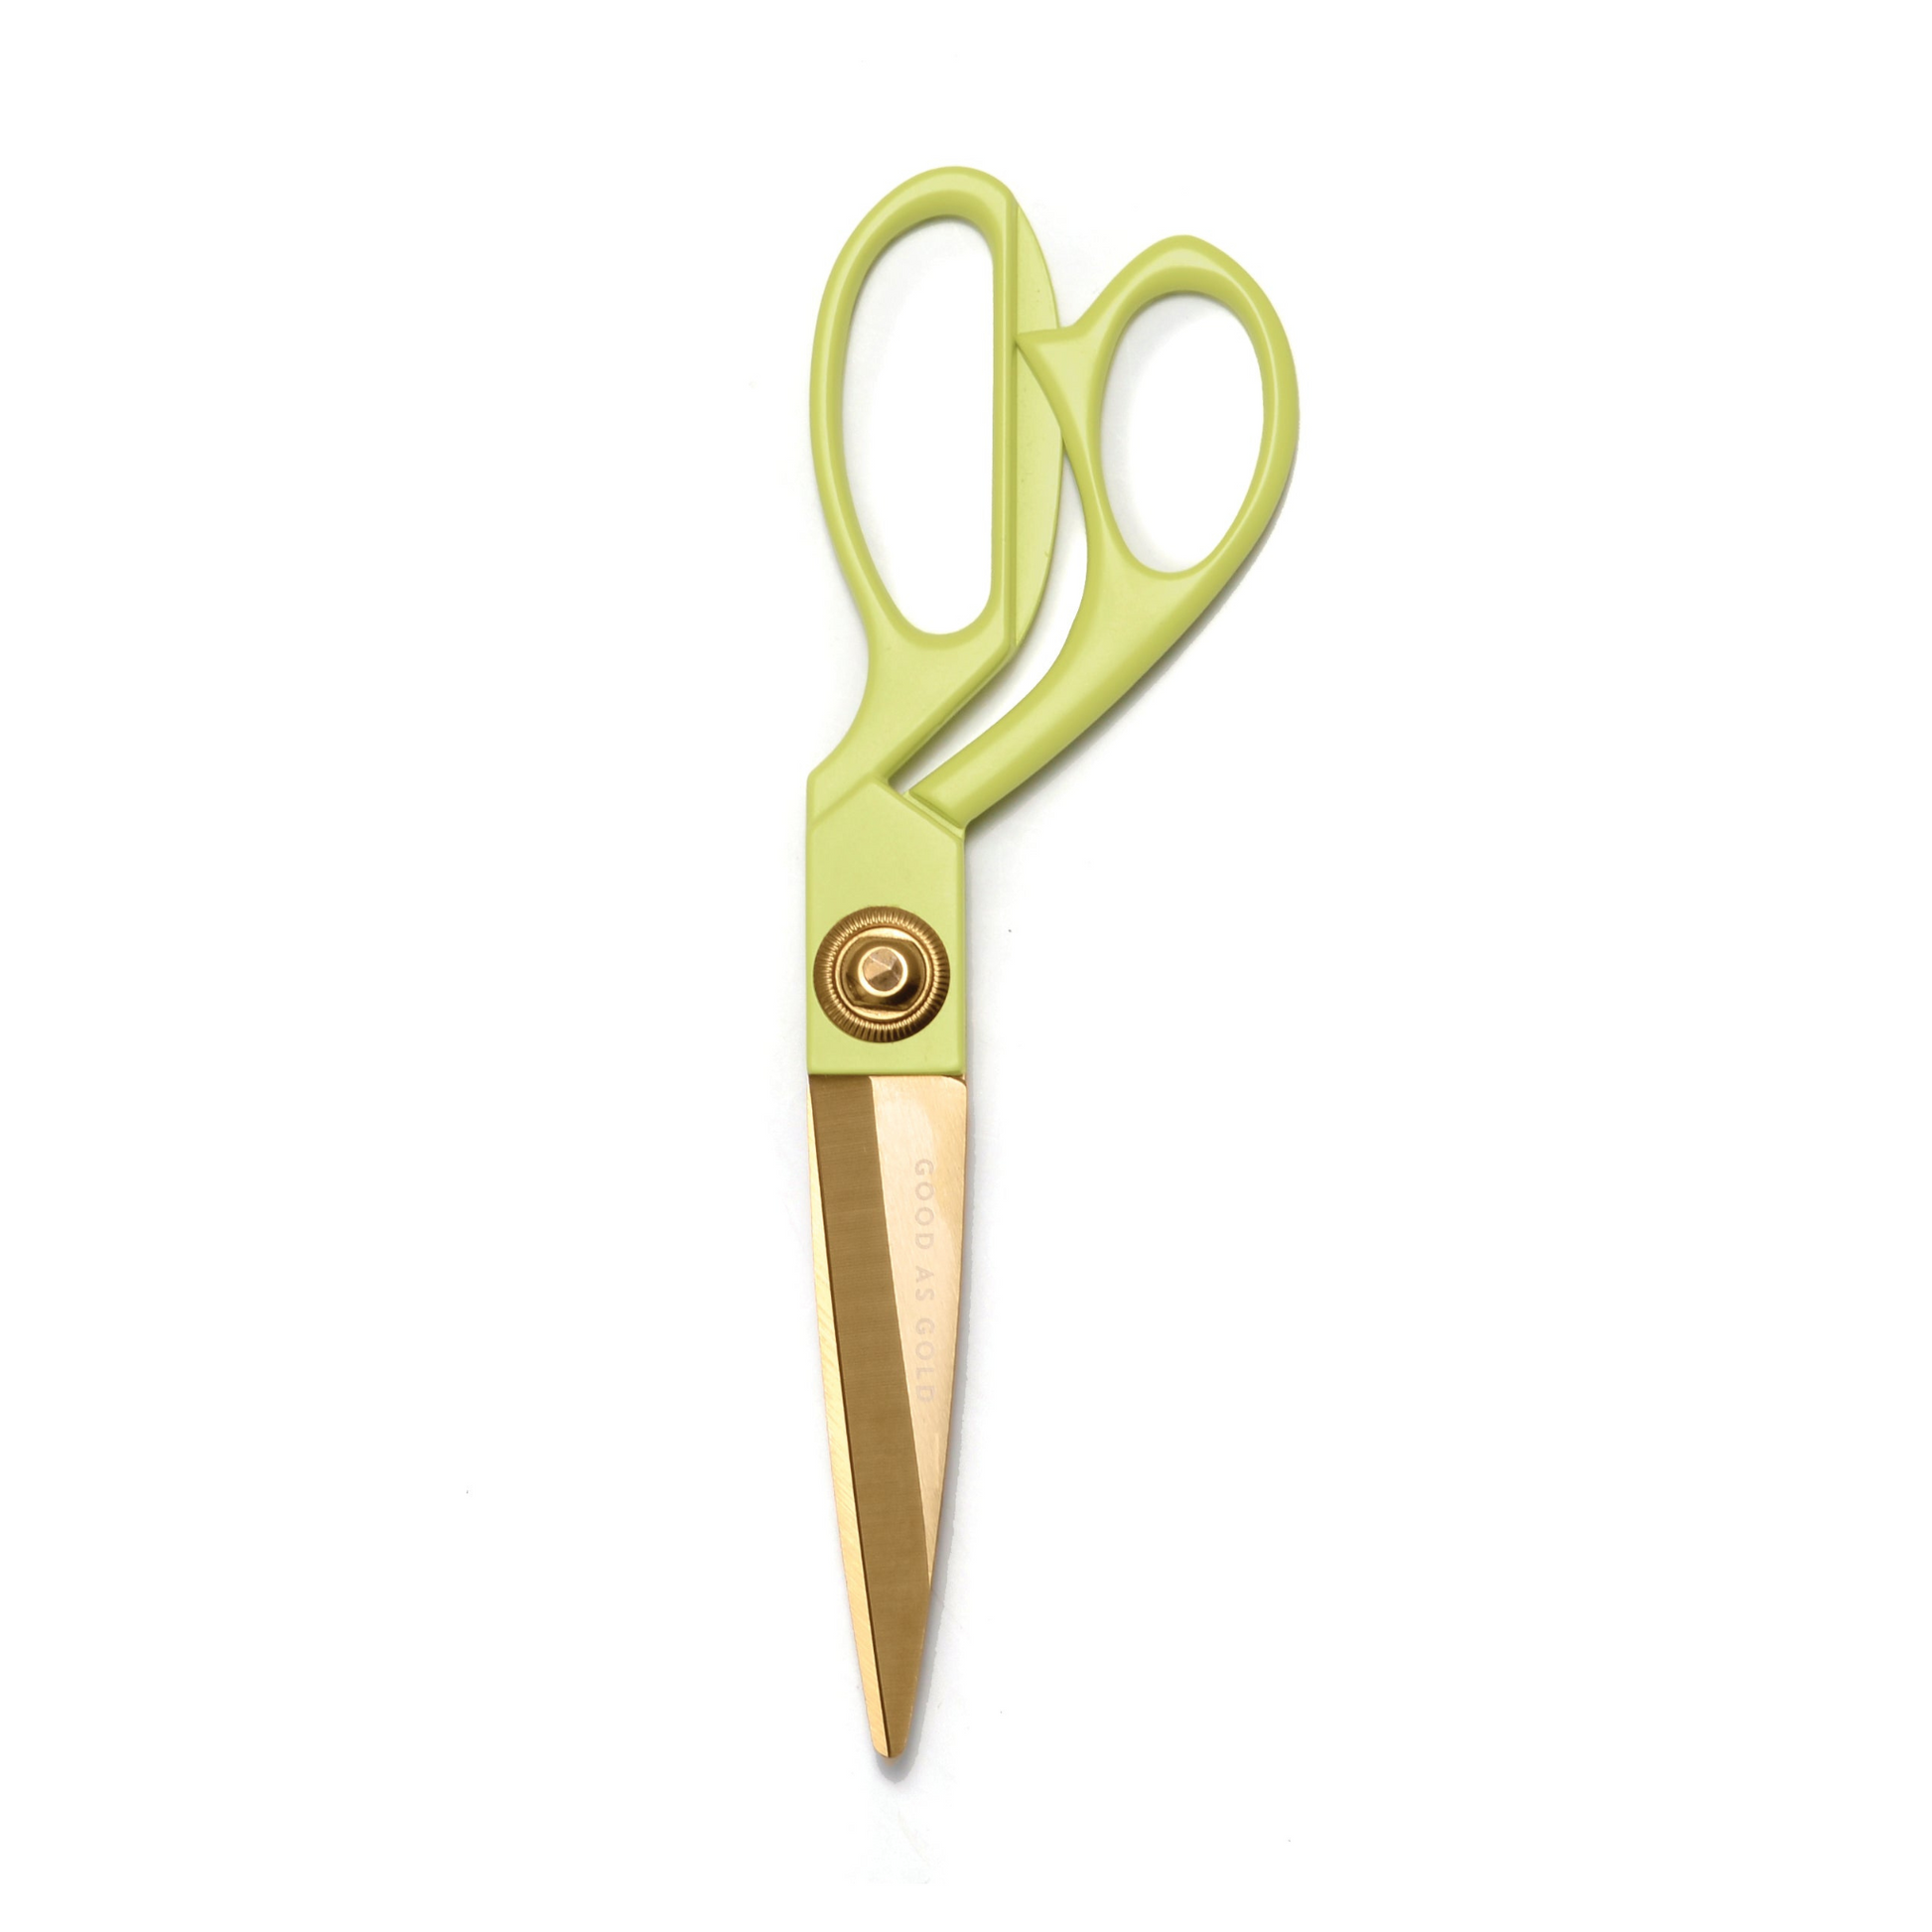 matcha green and gold scissors on a white background.